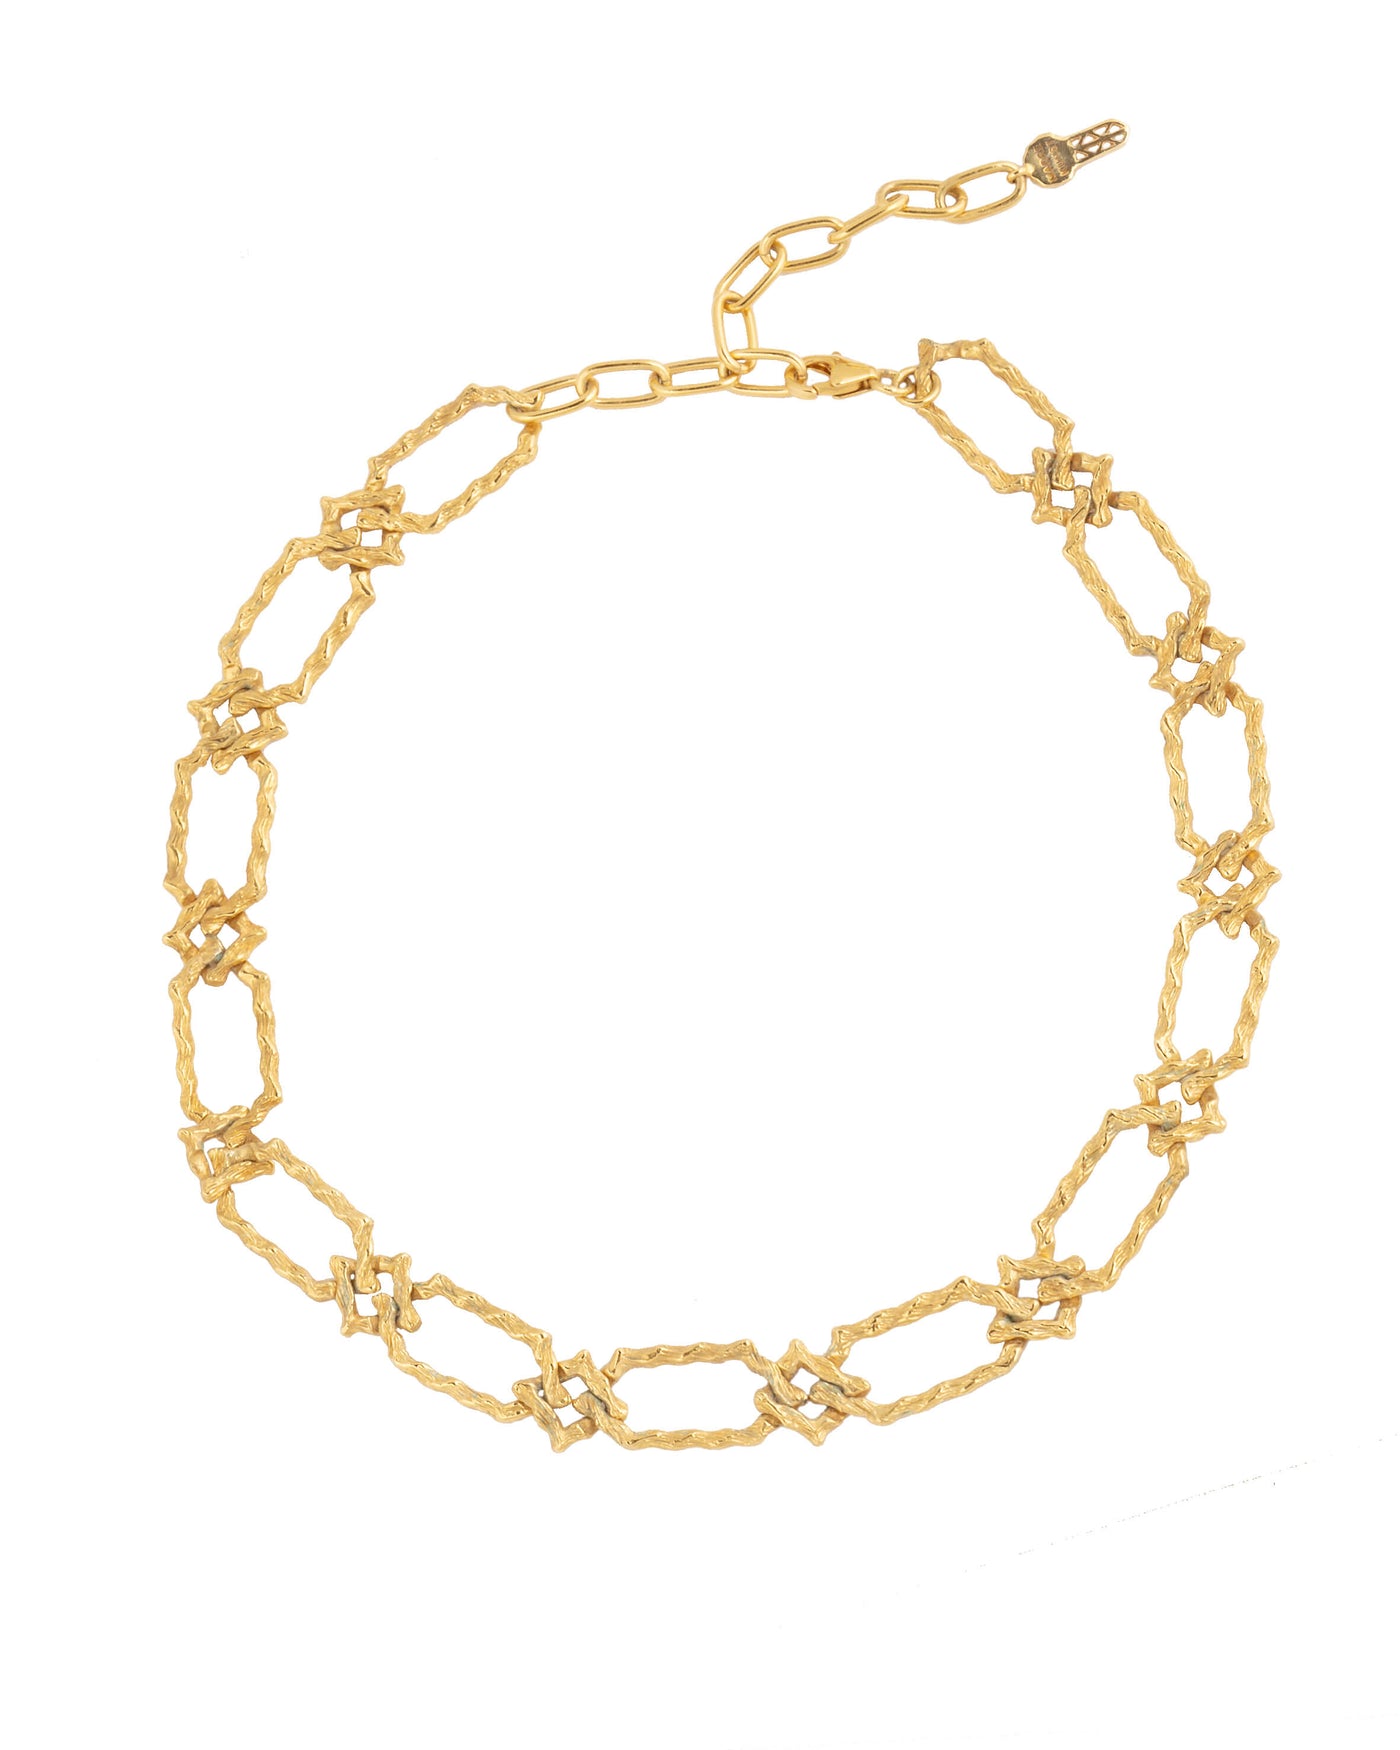 Handmade antique chain link choker. Silver, gold-plated